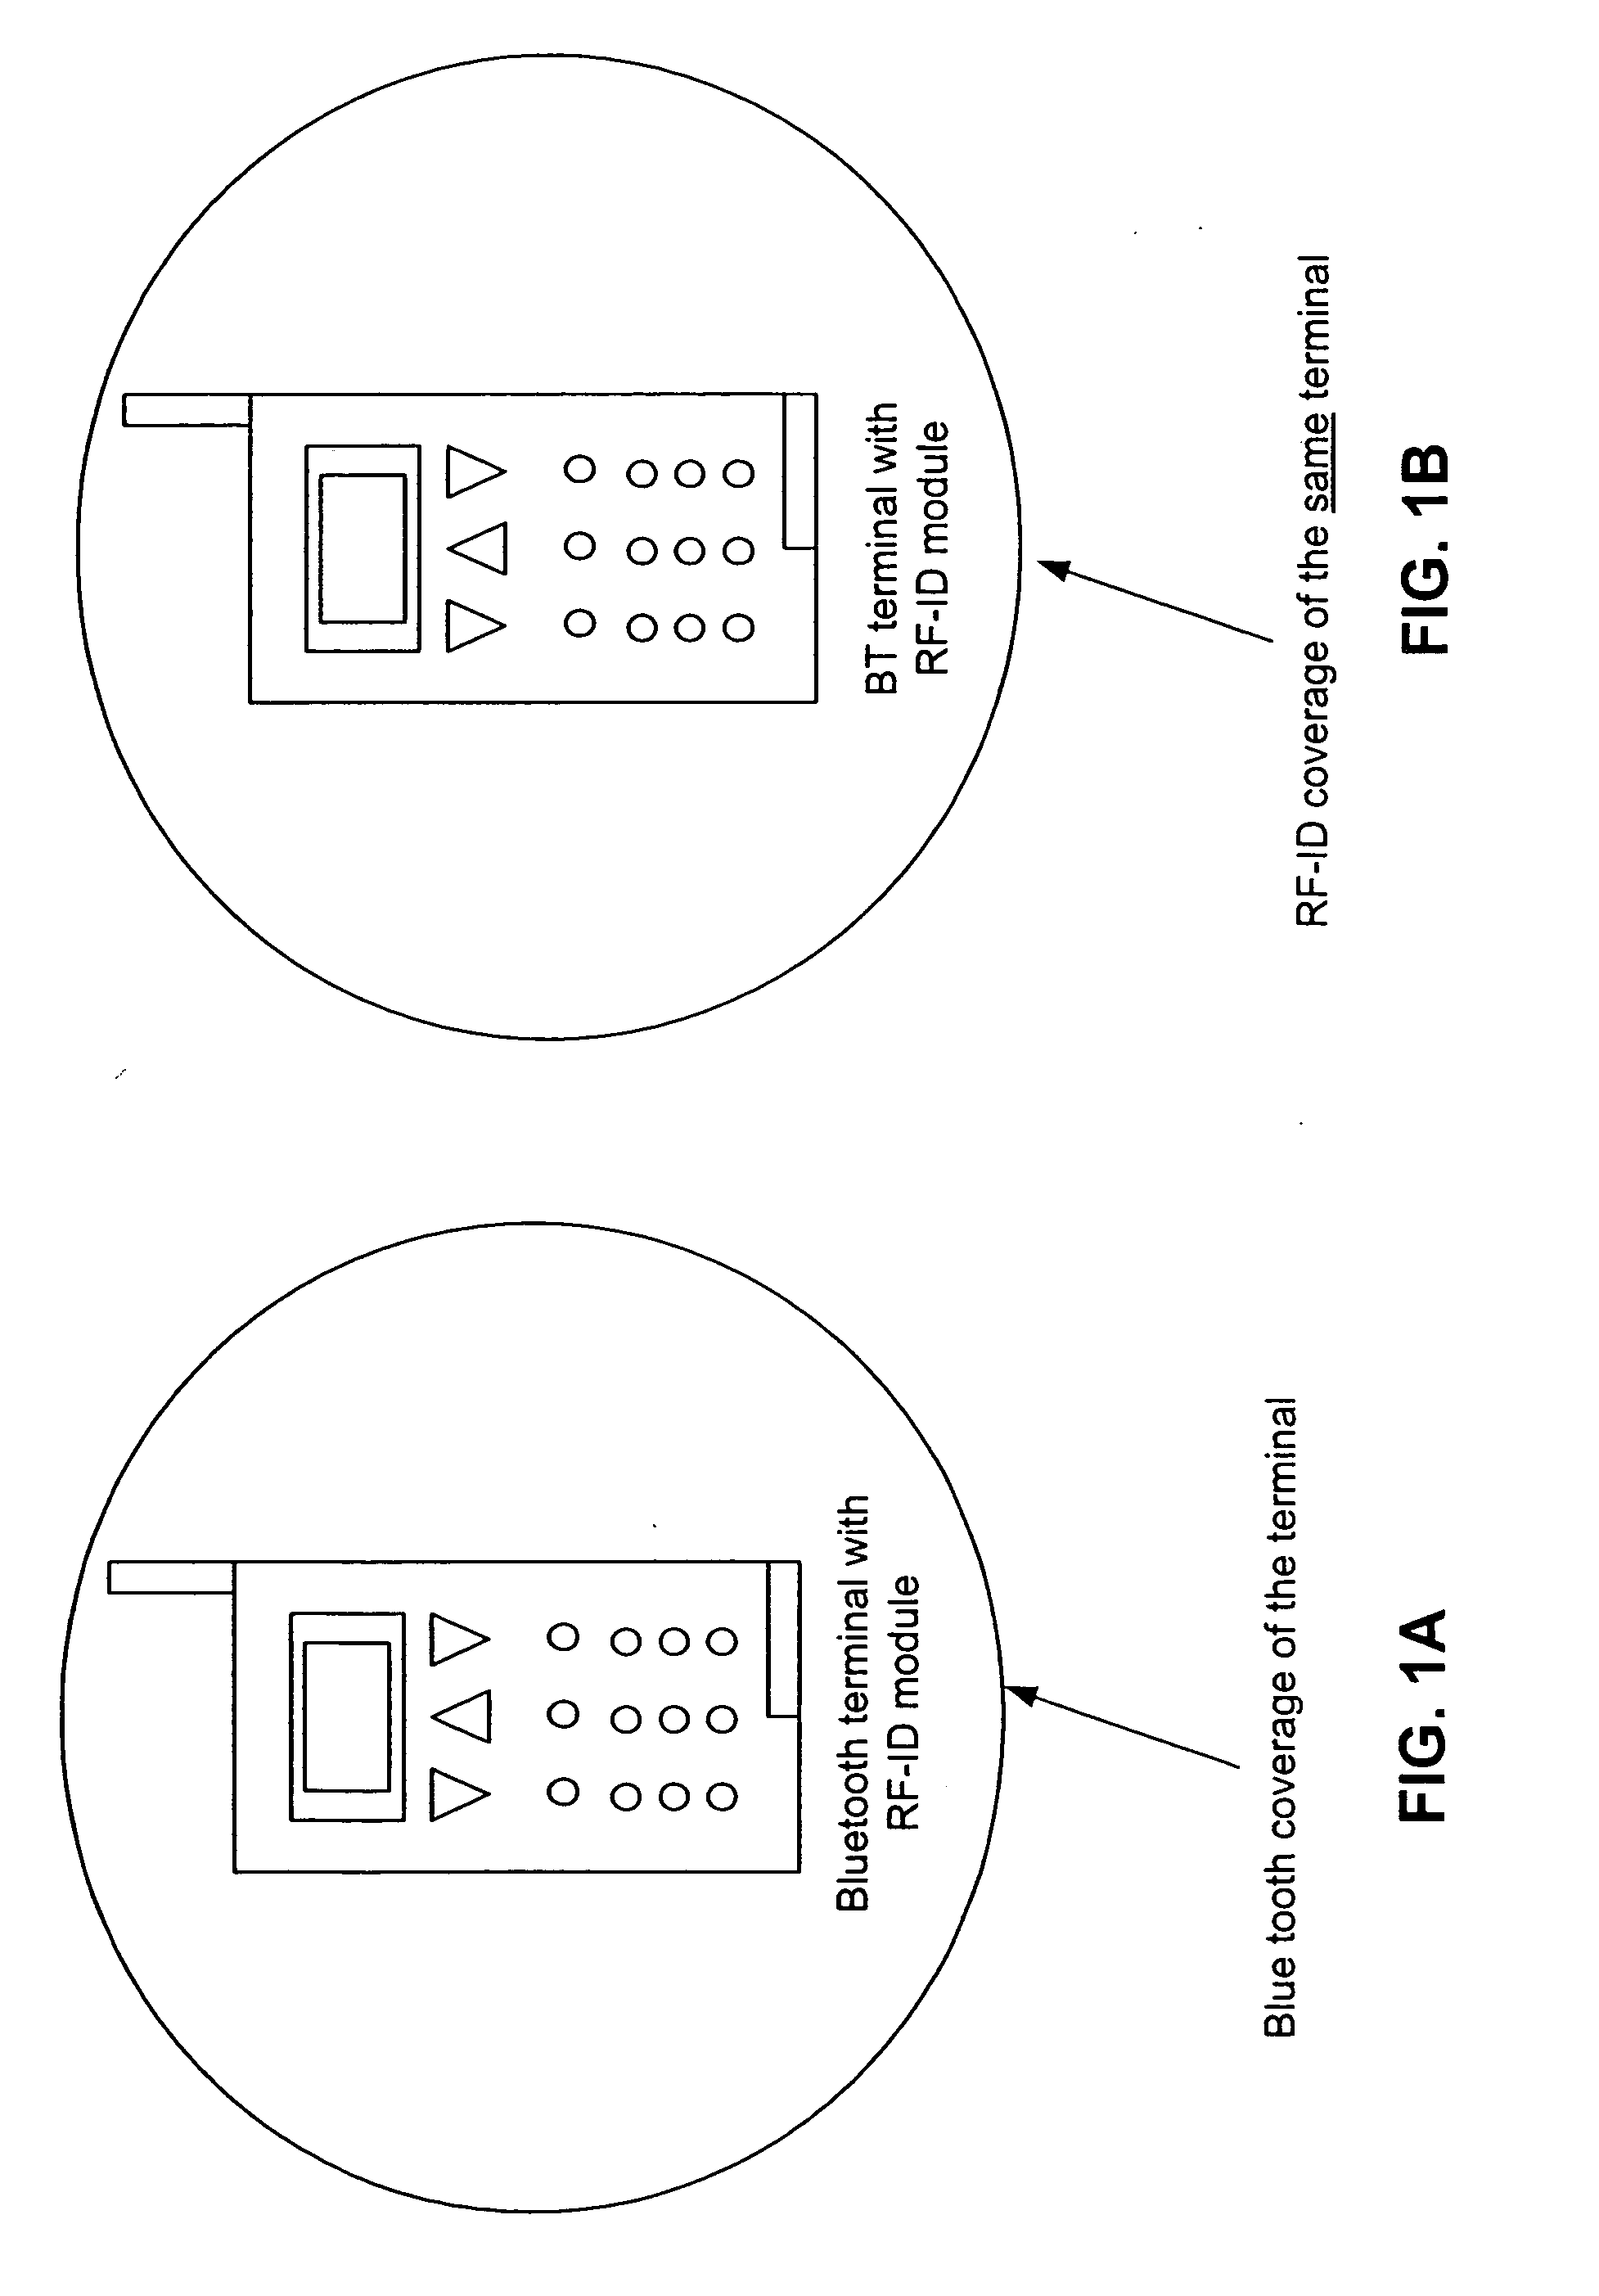 Radio frequency identification (RF-ID) based discovery for short range radio communication with reader device having transponder functionality